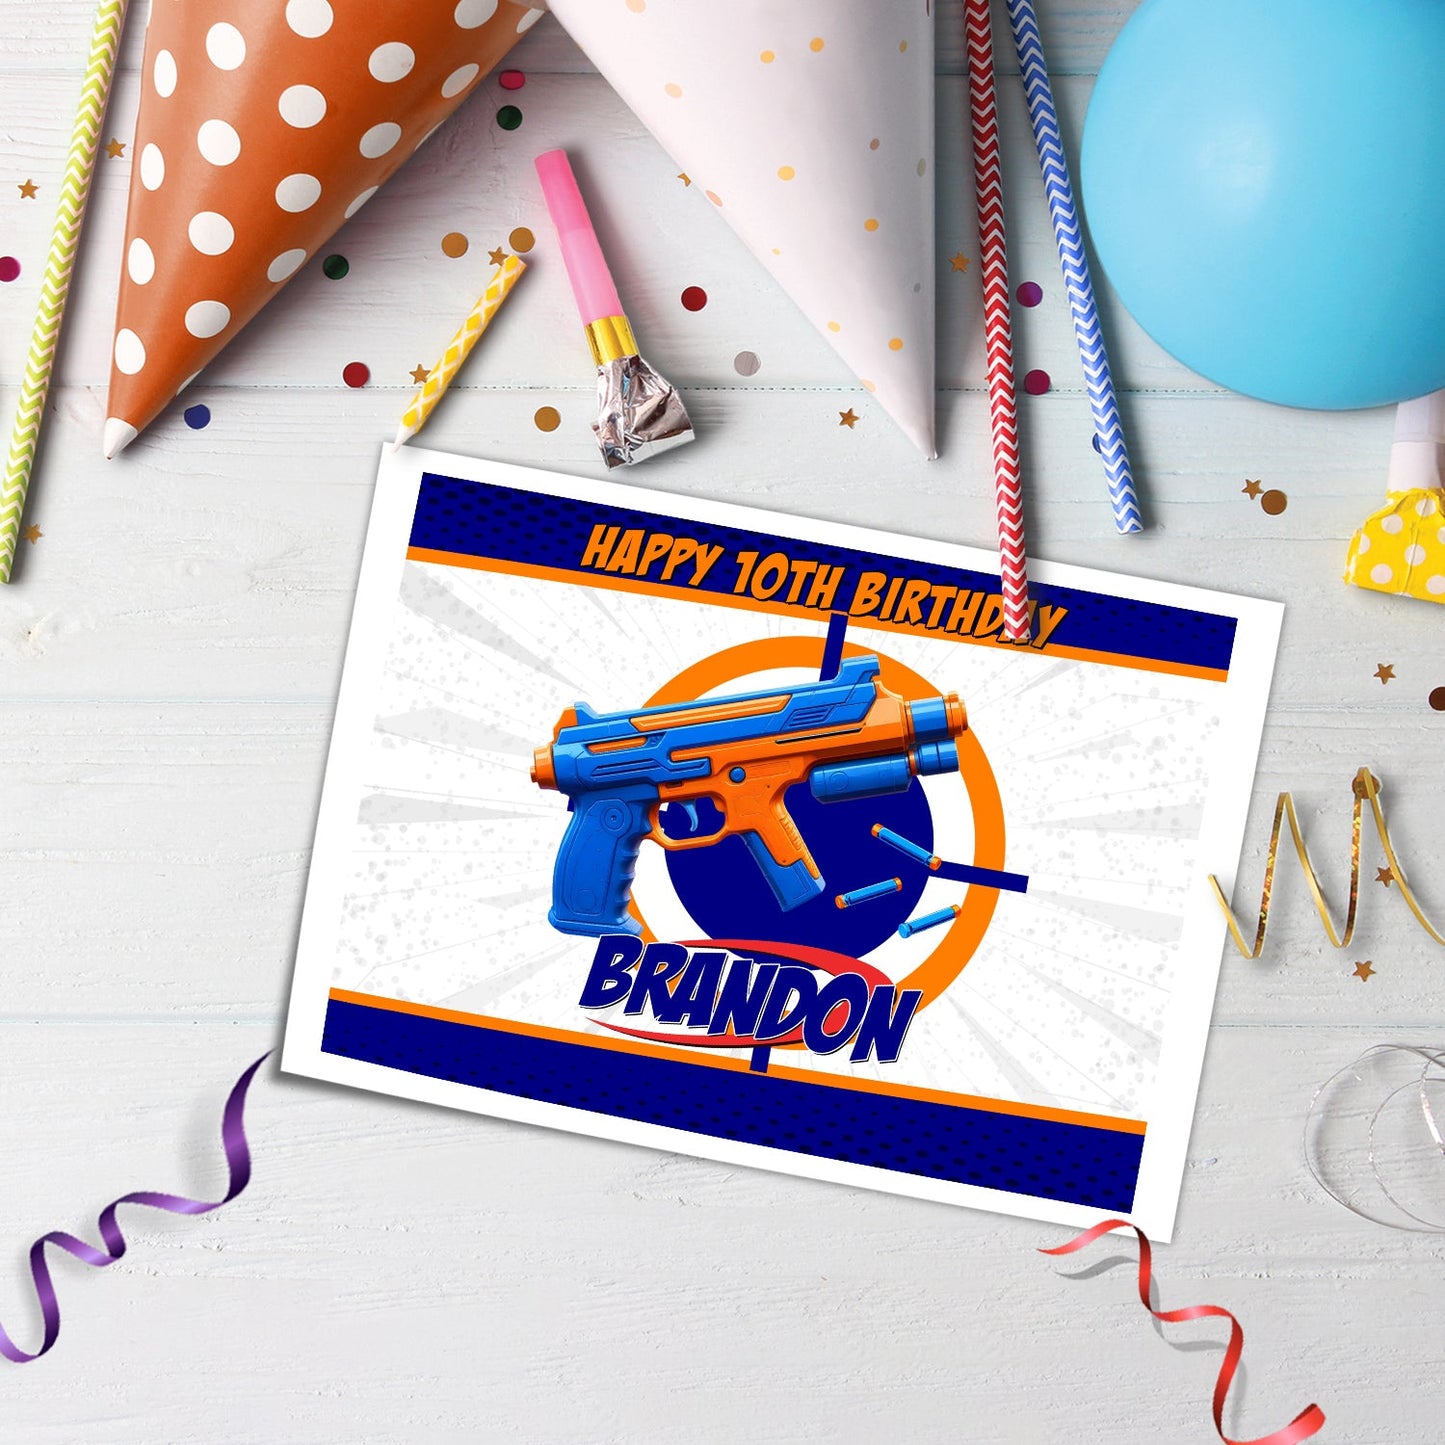 Personalize Your Party: Nerf Personalized Cake Images - Rectangle for Unique Celebrations